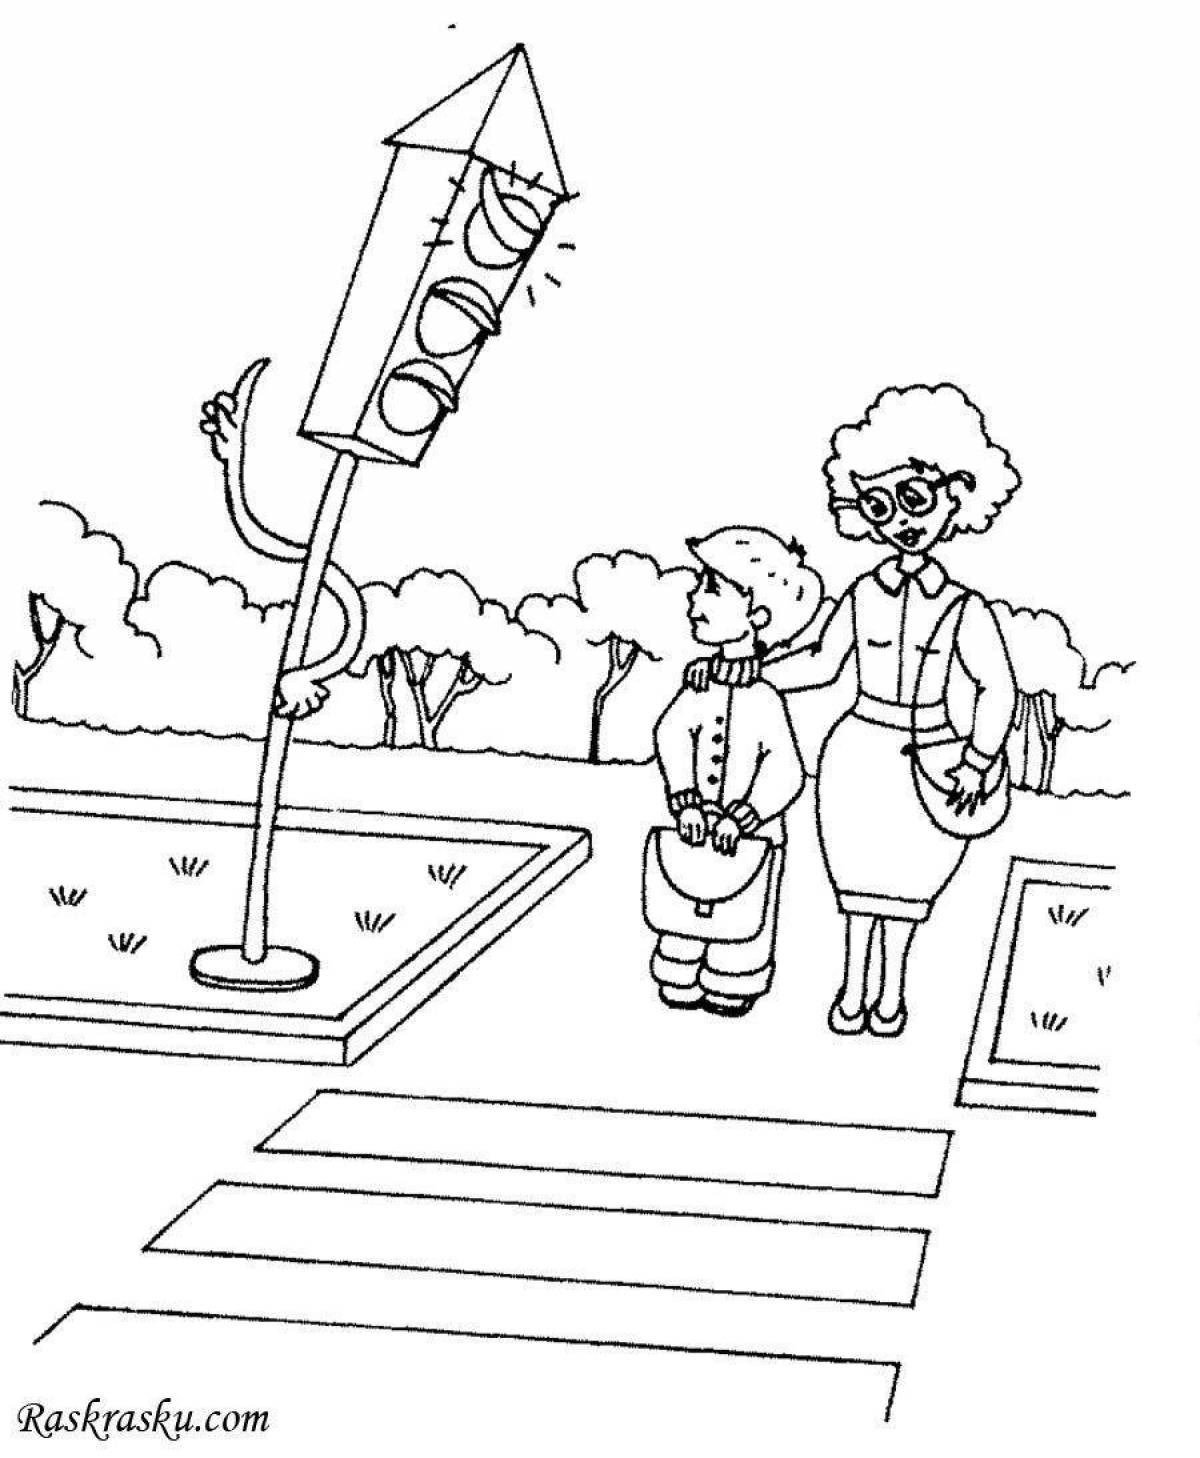 Color-coded traffic rules coloring page for elementary school